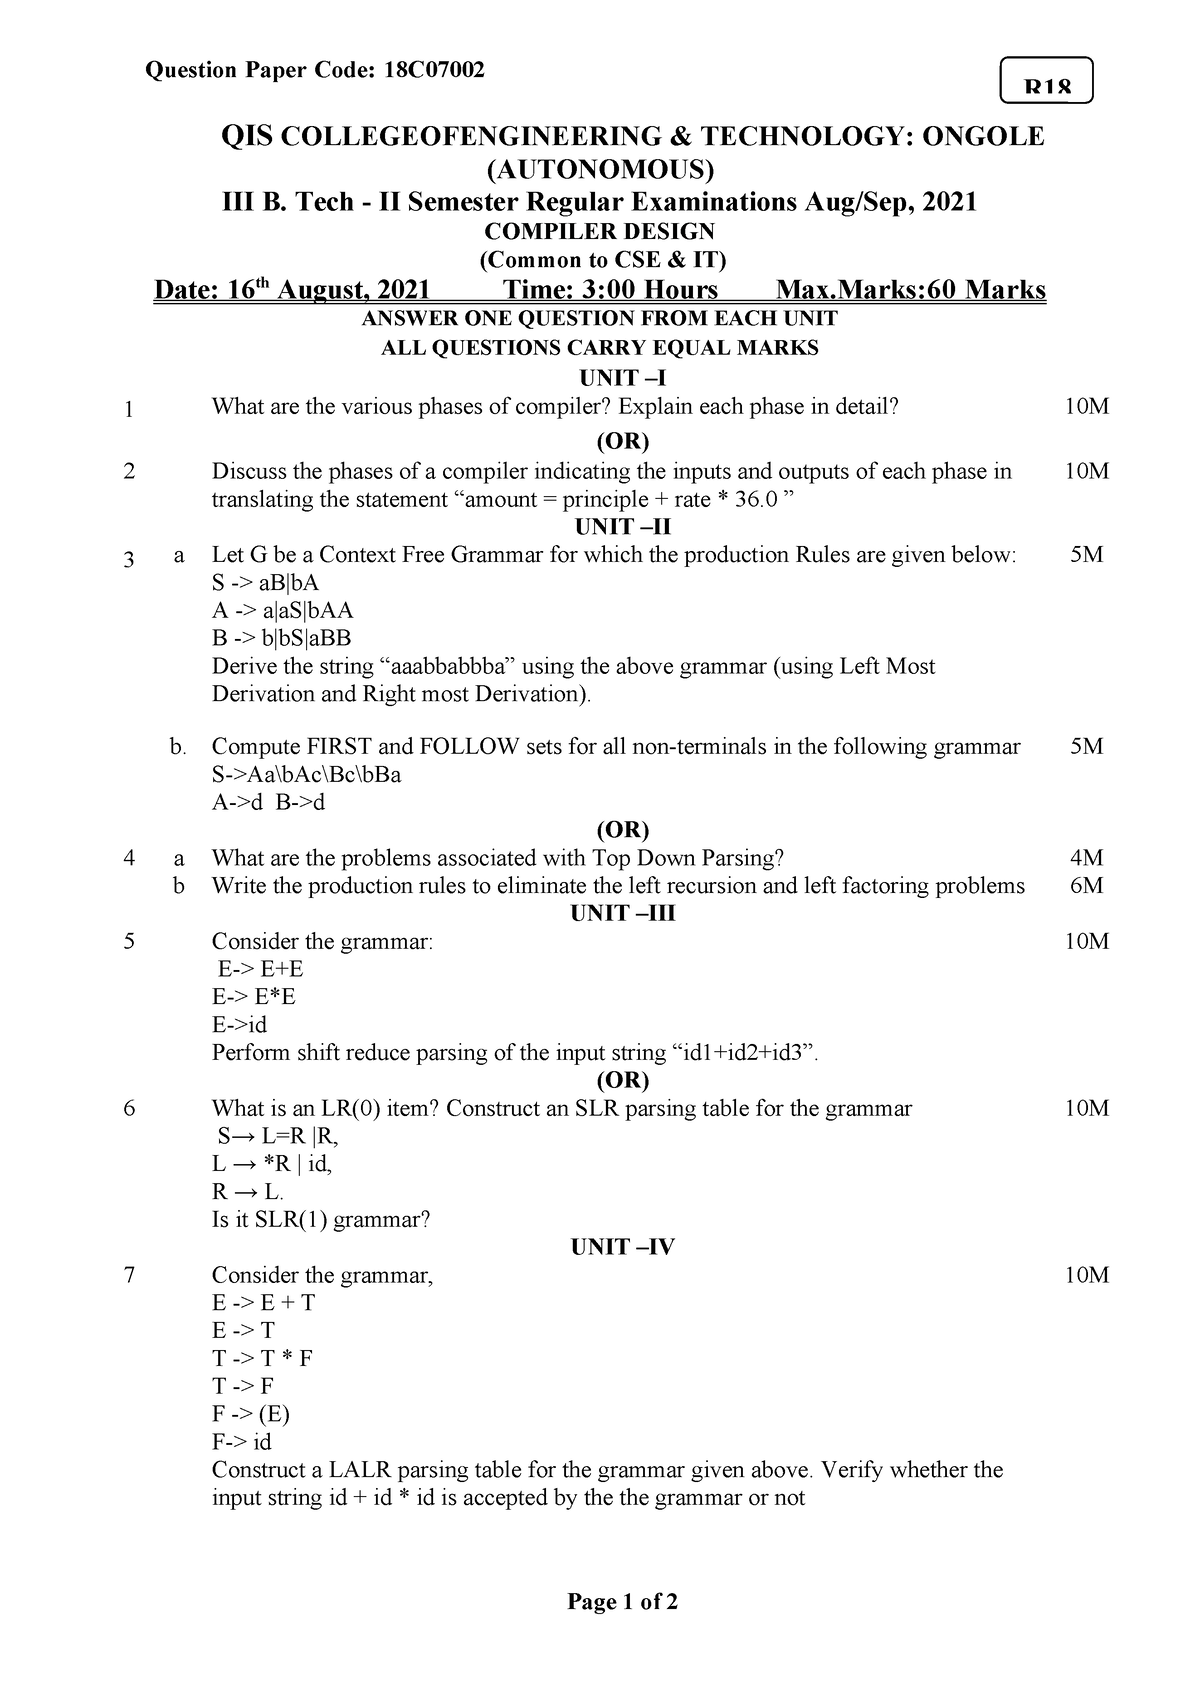 CD@2 - cd lecture notes - Question Paper Code: 18C QIS ...